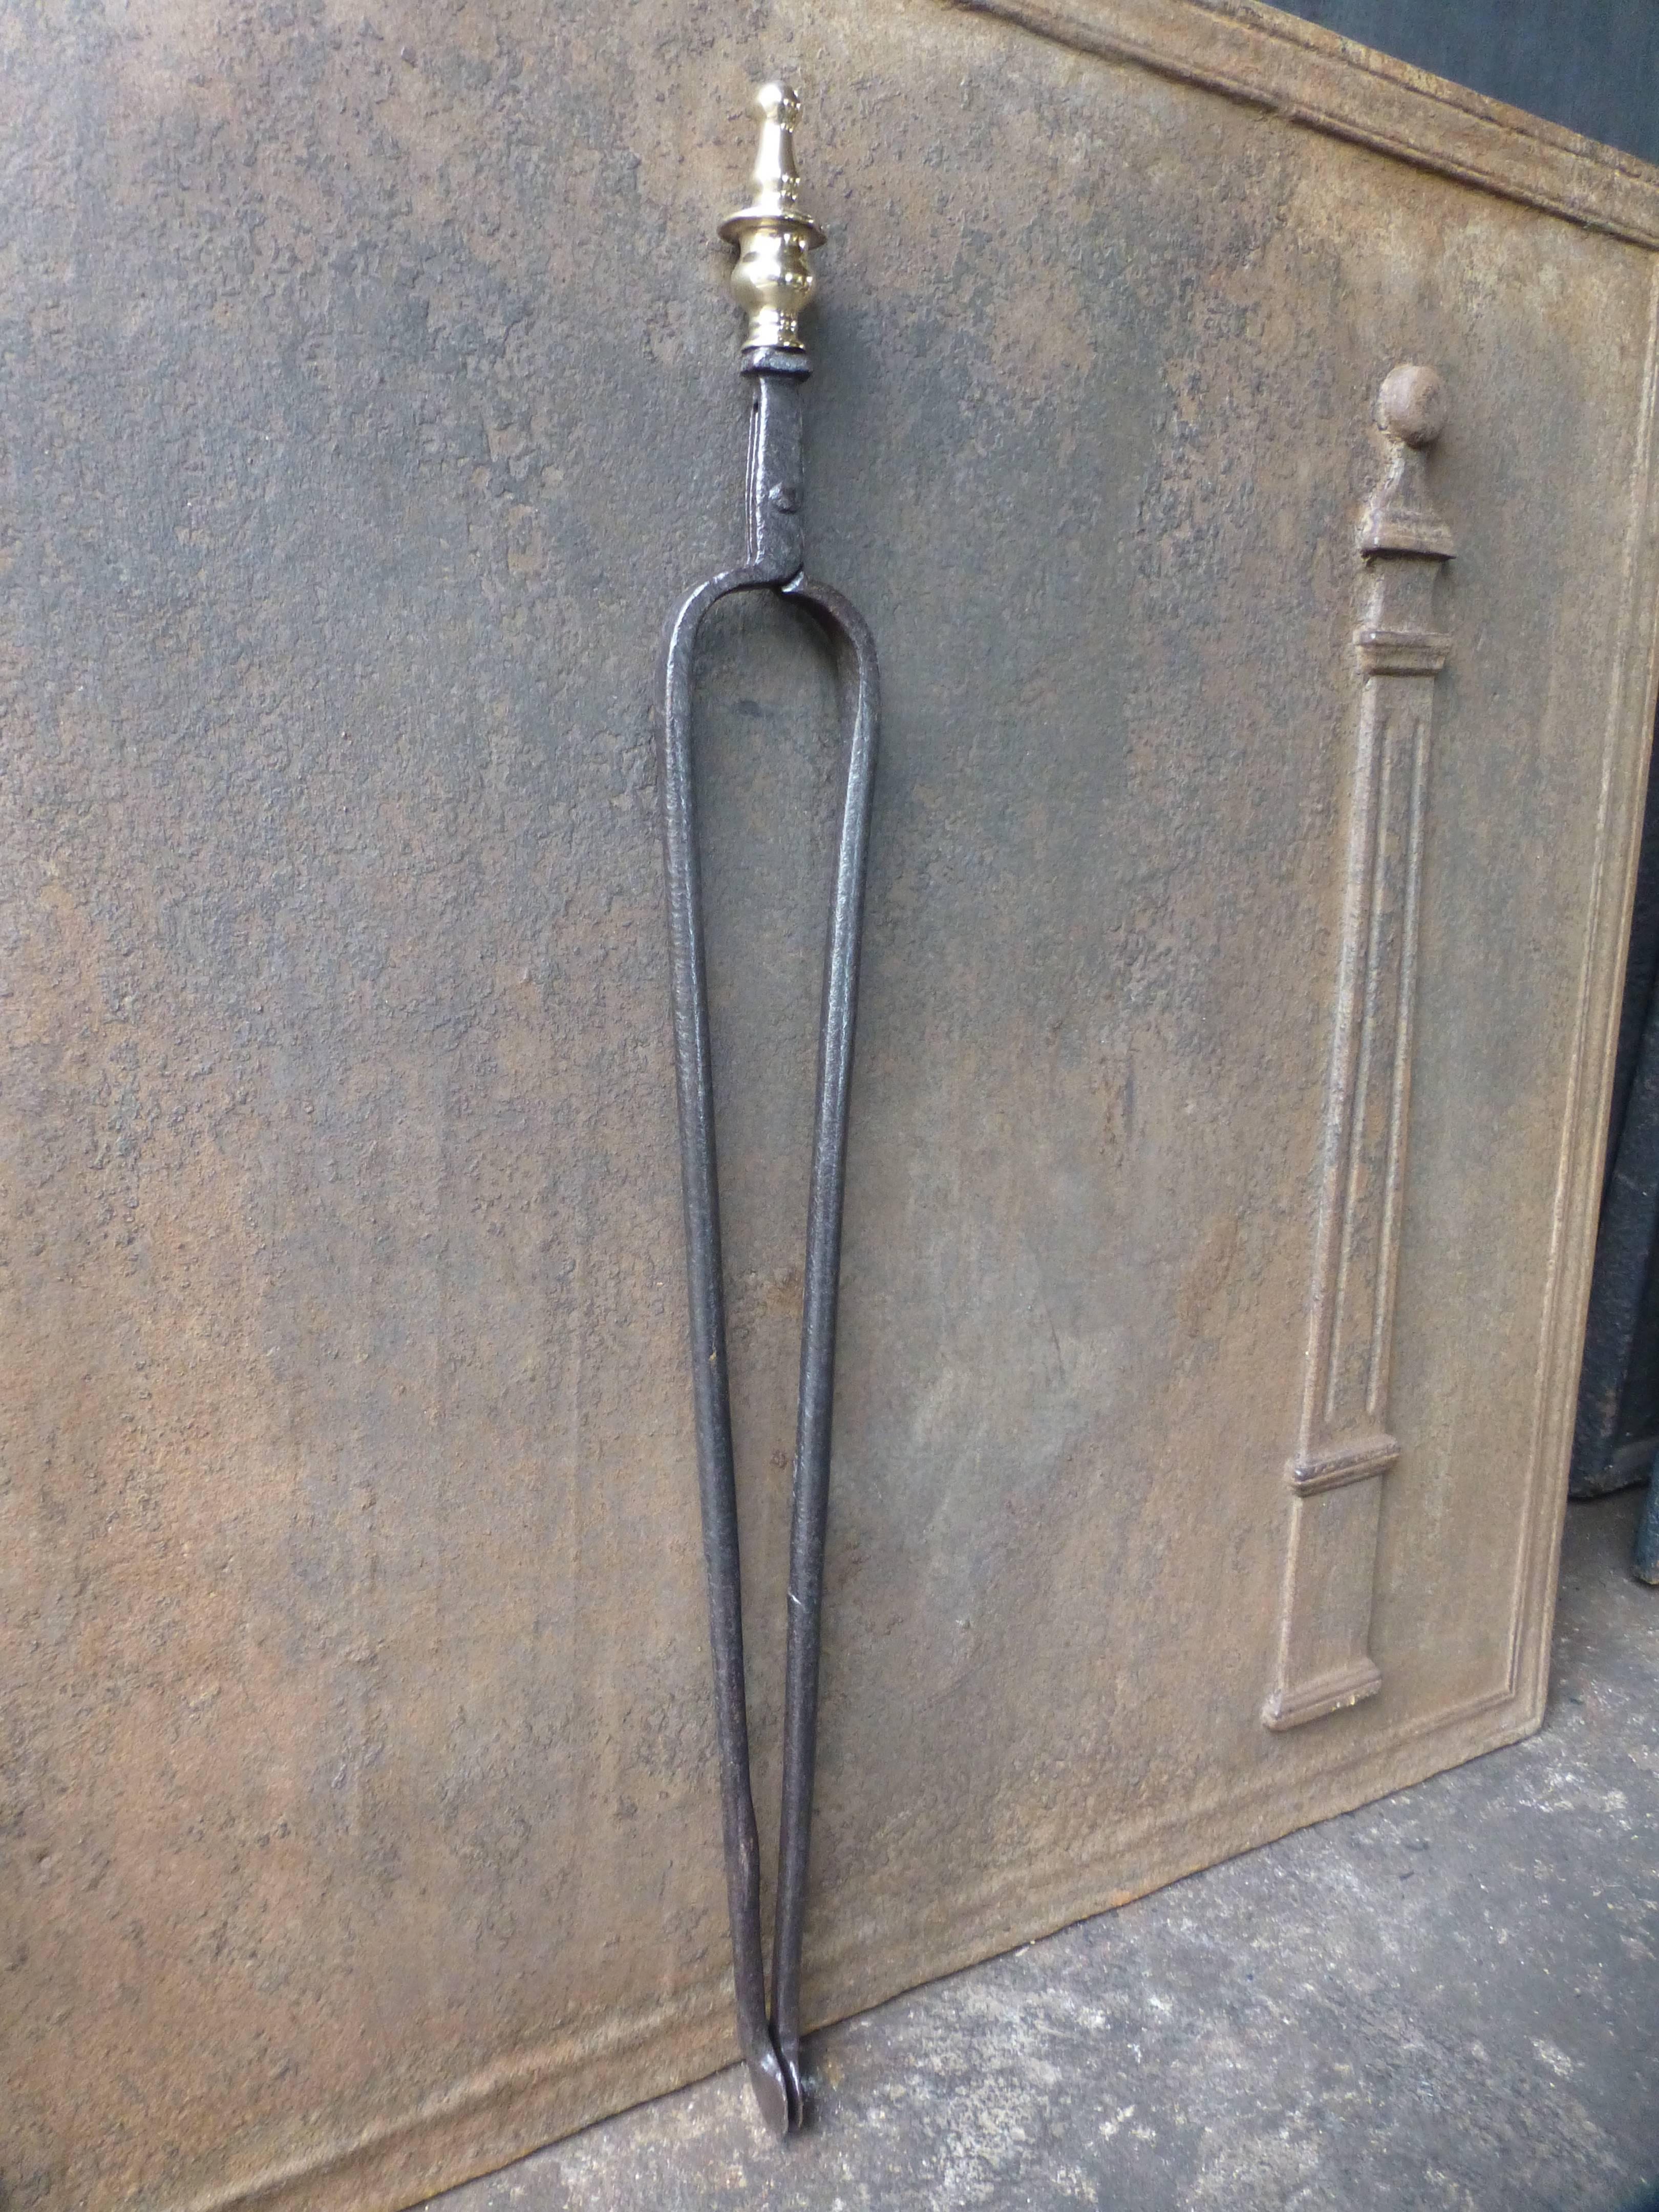 17th-18th century Dutch fire tongs made of wrought iron and polished brass.